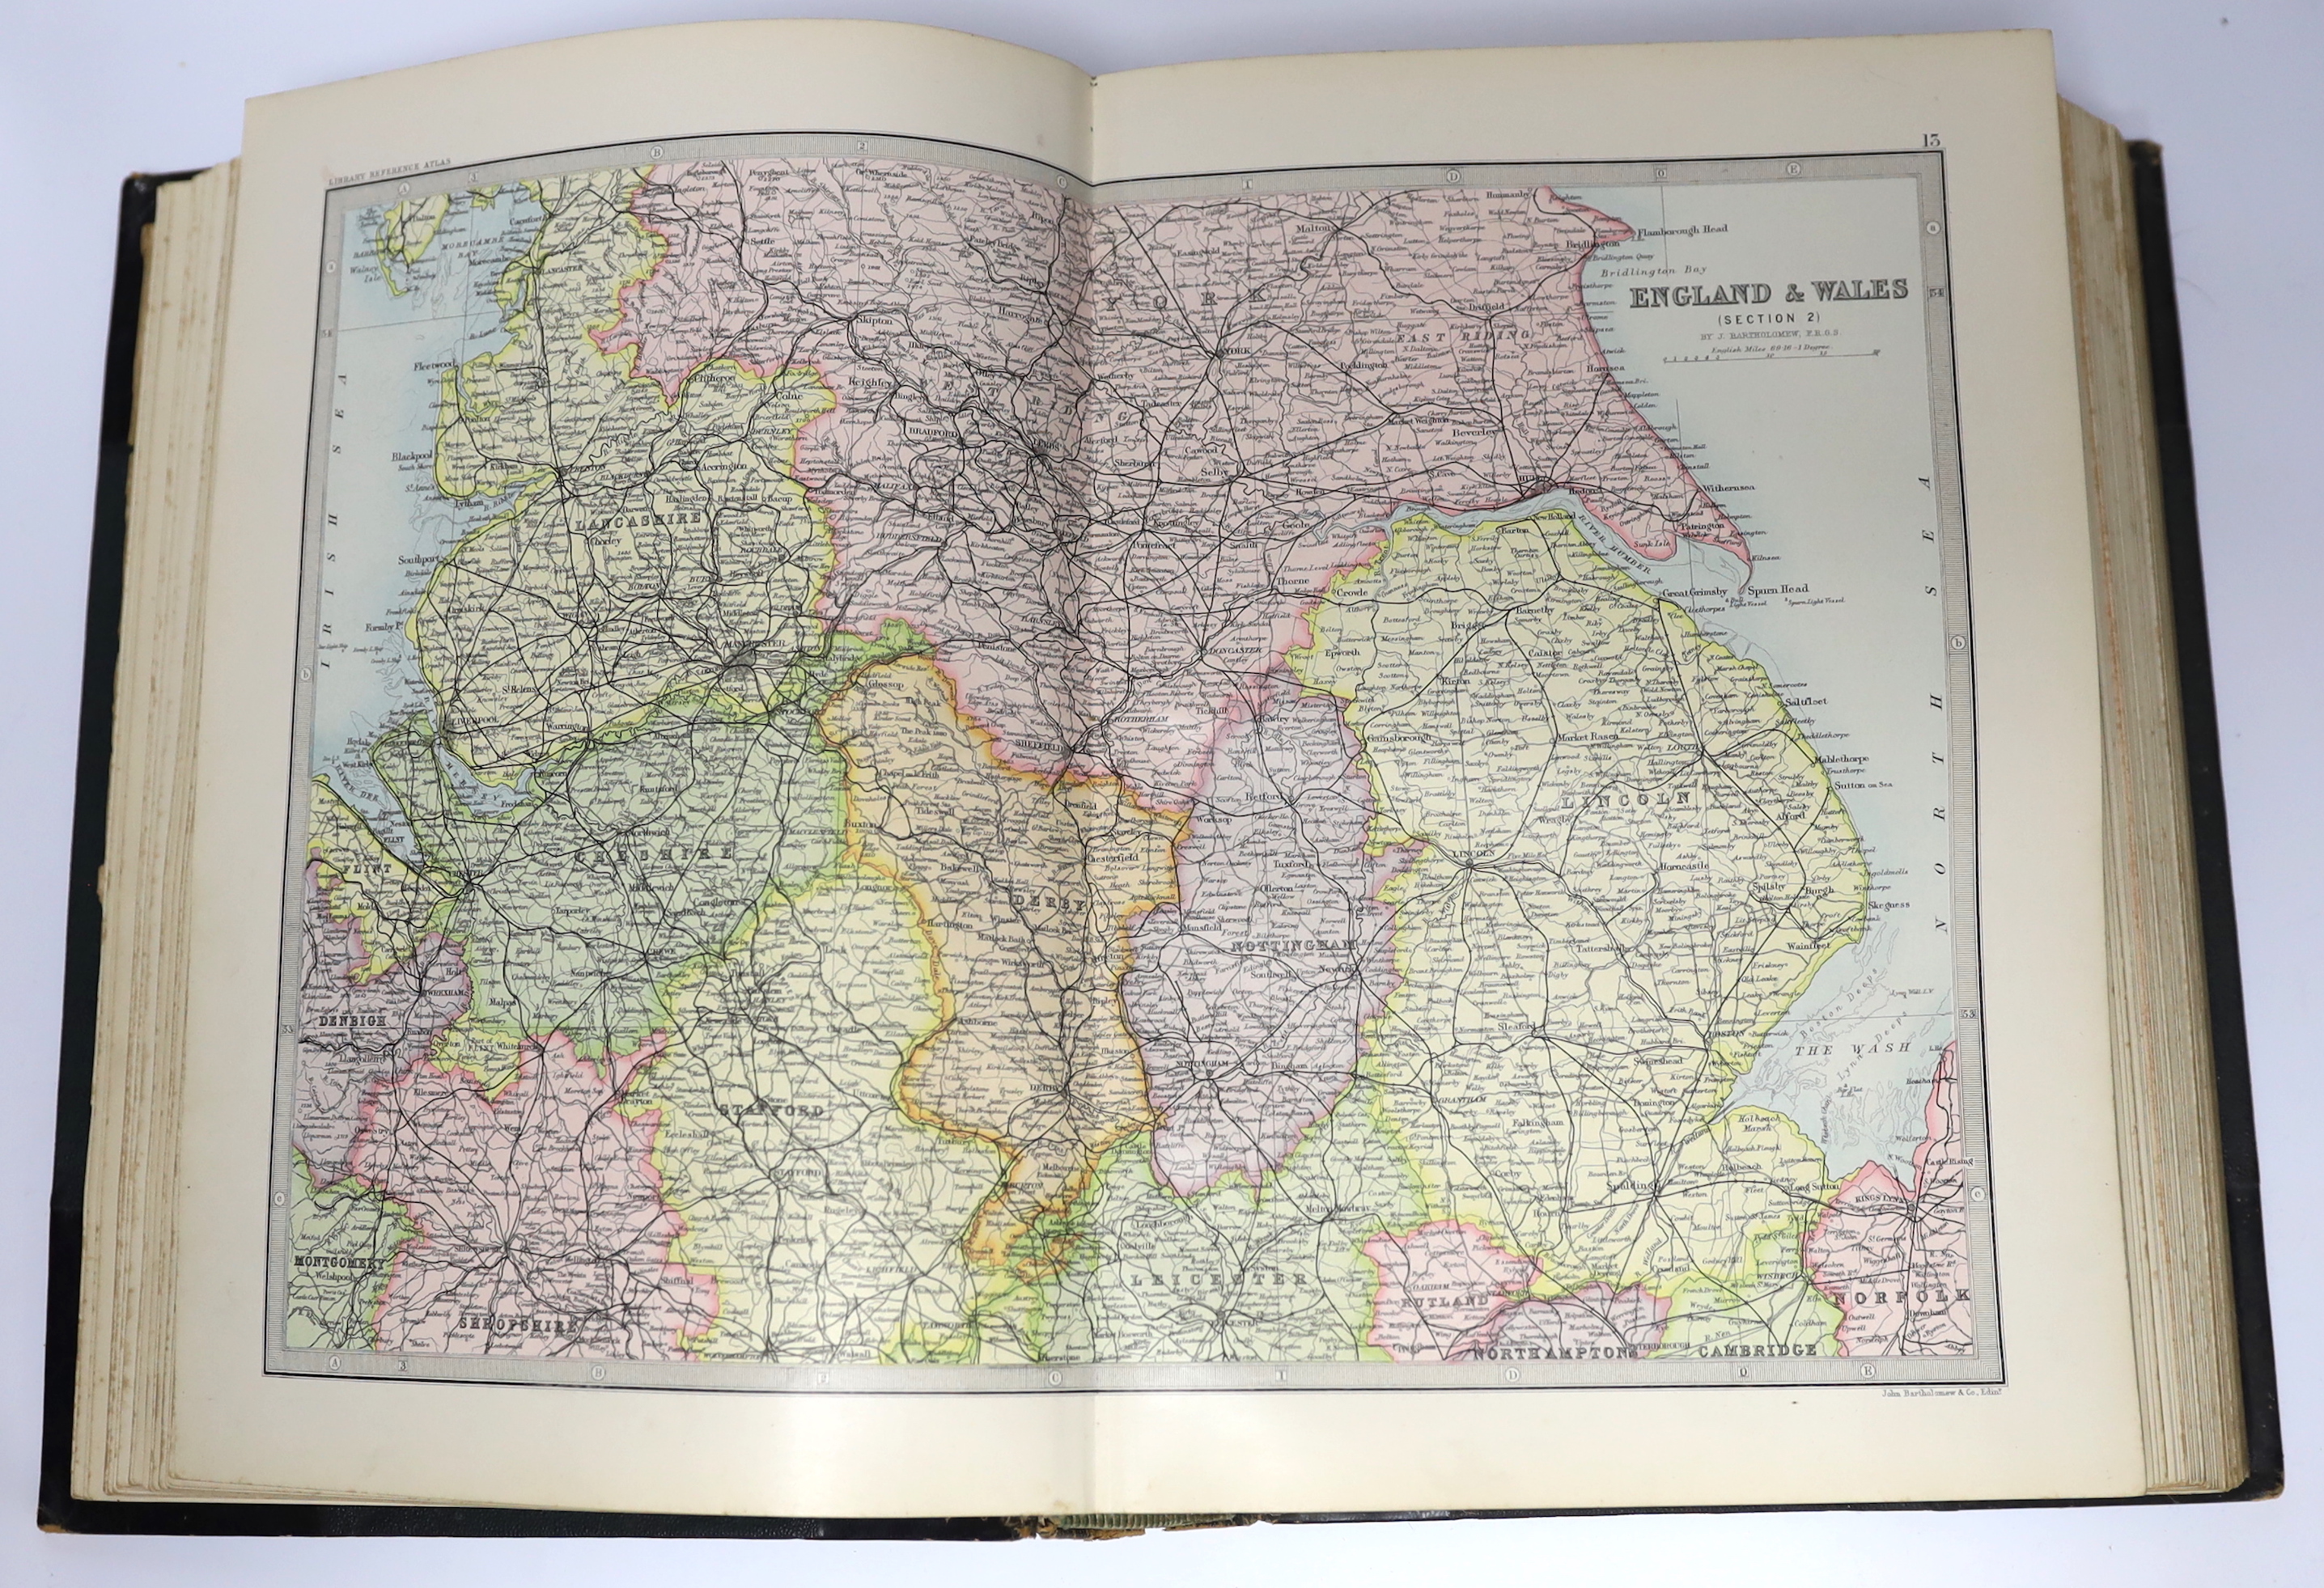 Bartholomew, John - The Library Reference Atlas of the World. 84 d-page coloured maps; contemp. half morocco and cloth, panelled spine, ge. and marbled edges, folio. (1890)